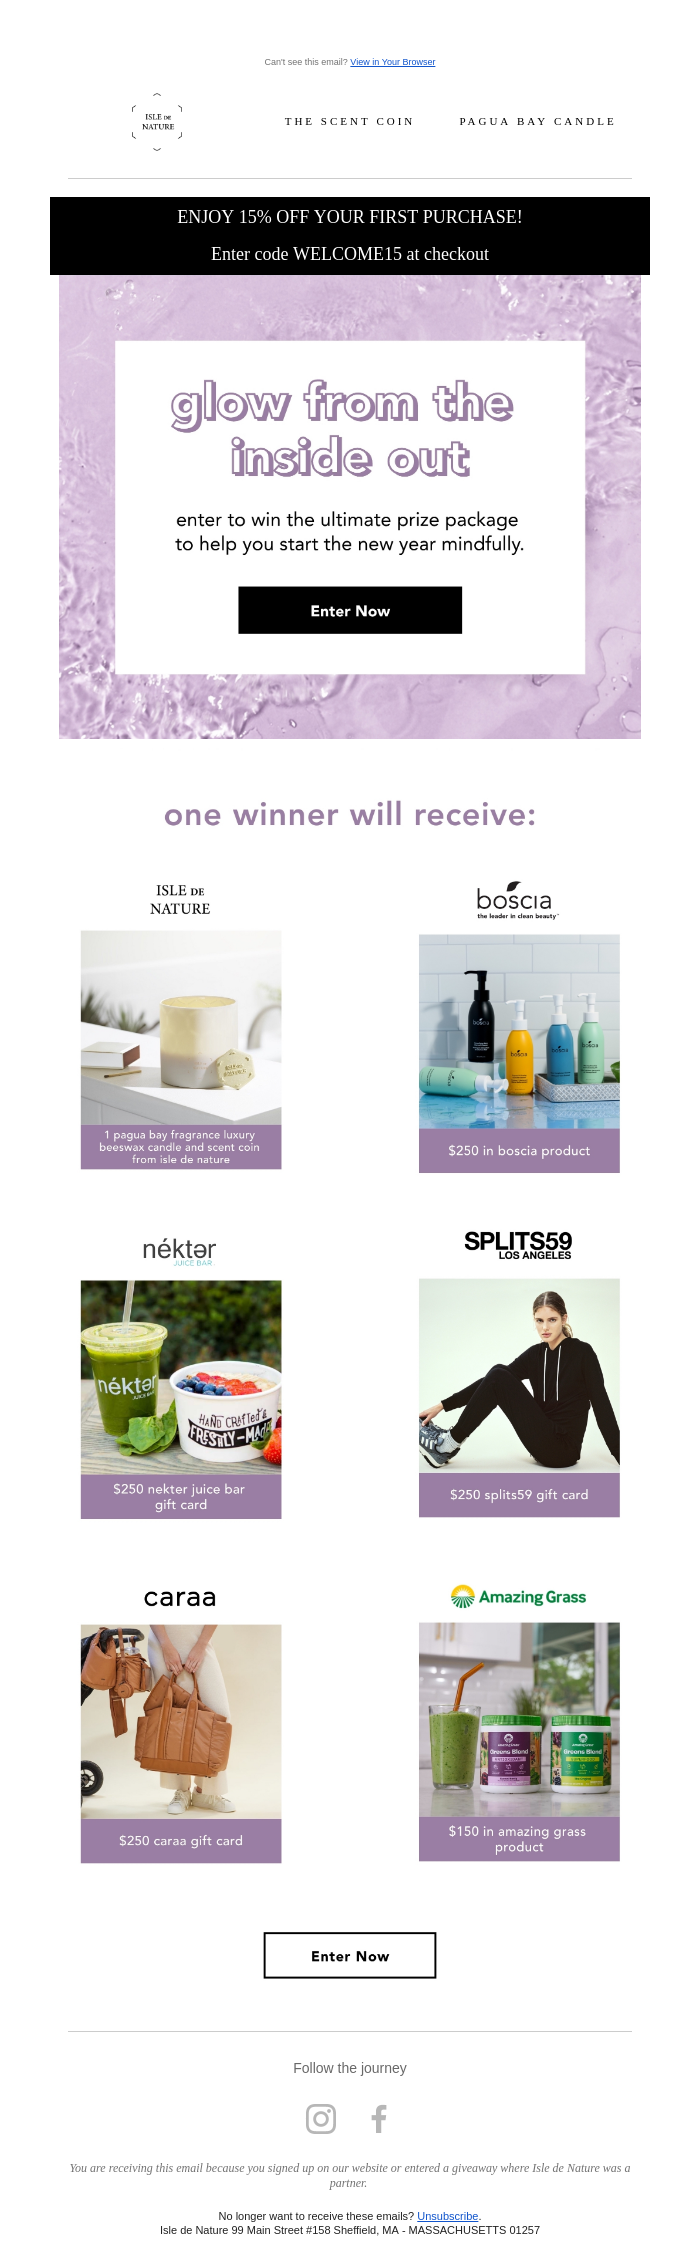 Example of ecommerce business Isle de Nature’s welcome email, which encourages subscribers to enter to win a prize package that will help them start the new year mindfully.